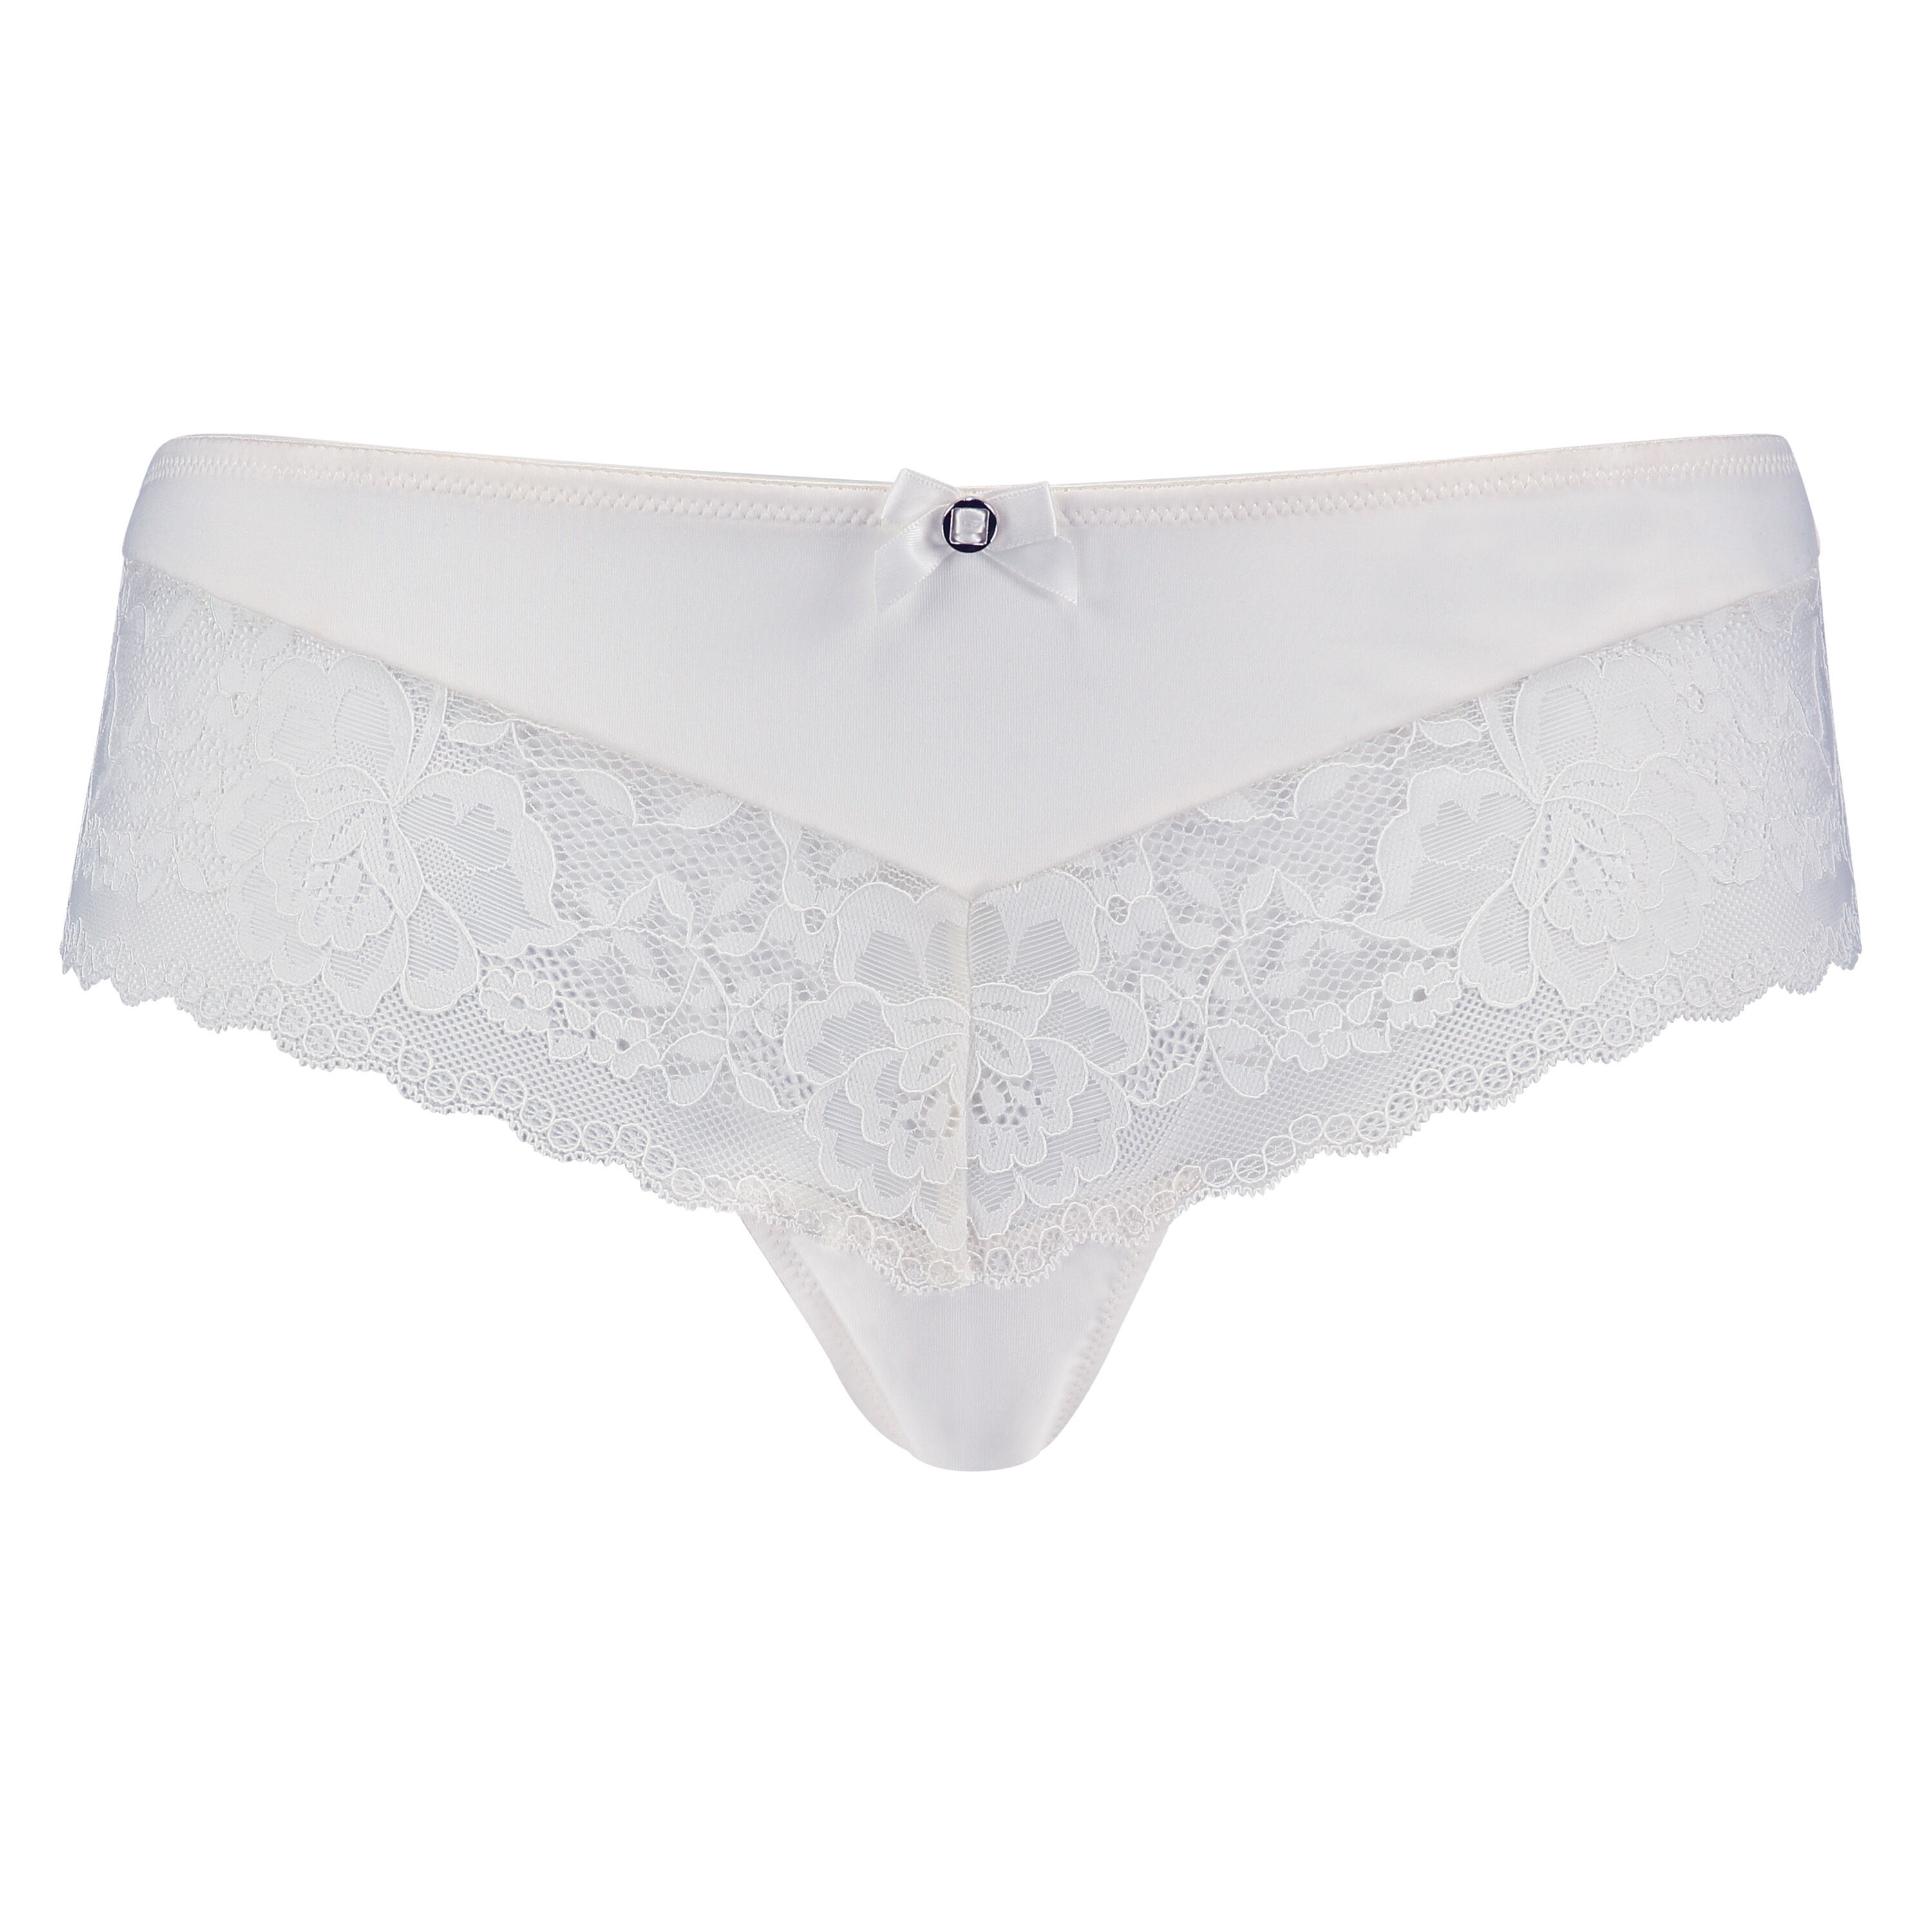 Hunkemöller Synthetic Maya Brazilian in White Womens Clothing Lingerie Lingerie and panty sets 